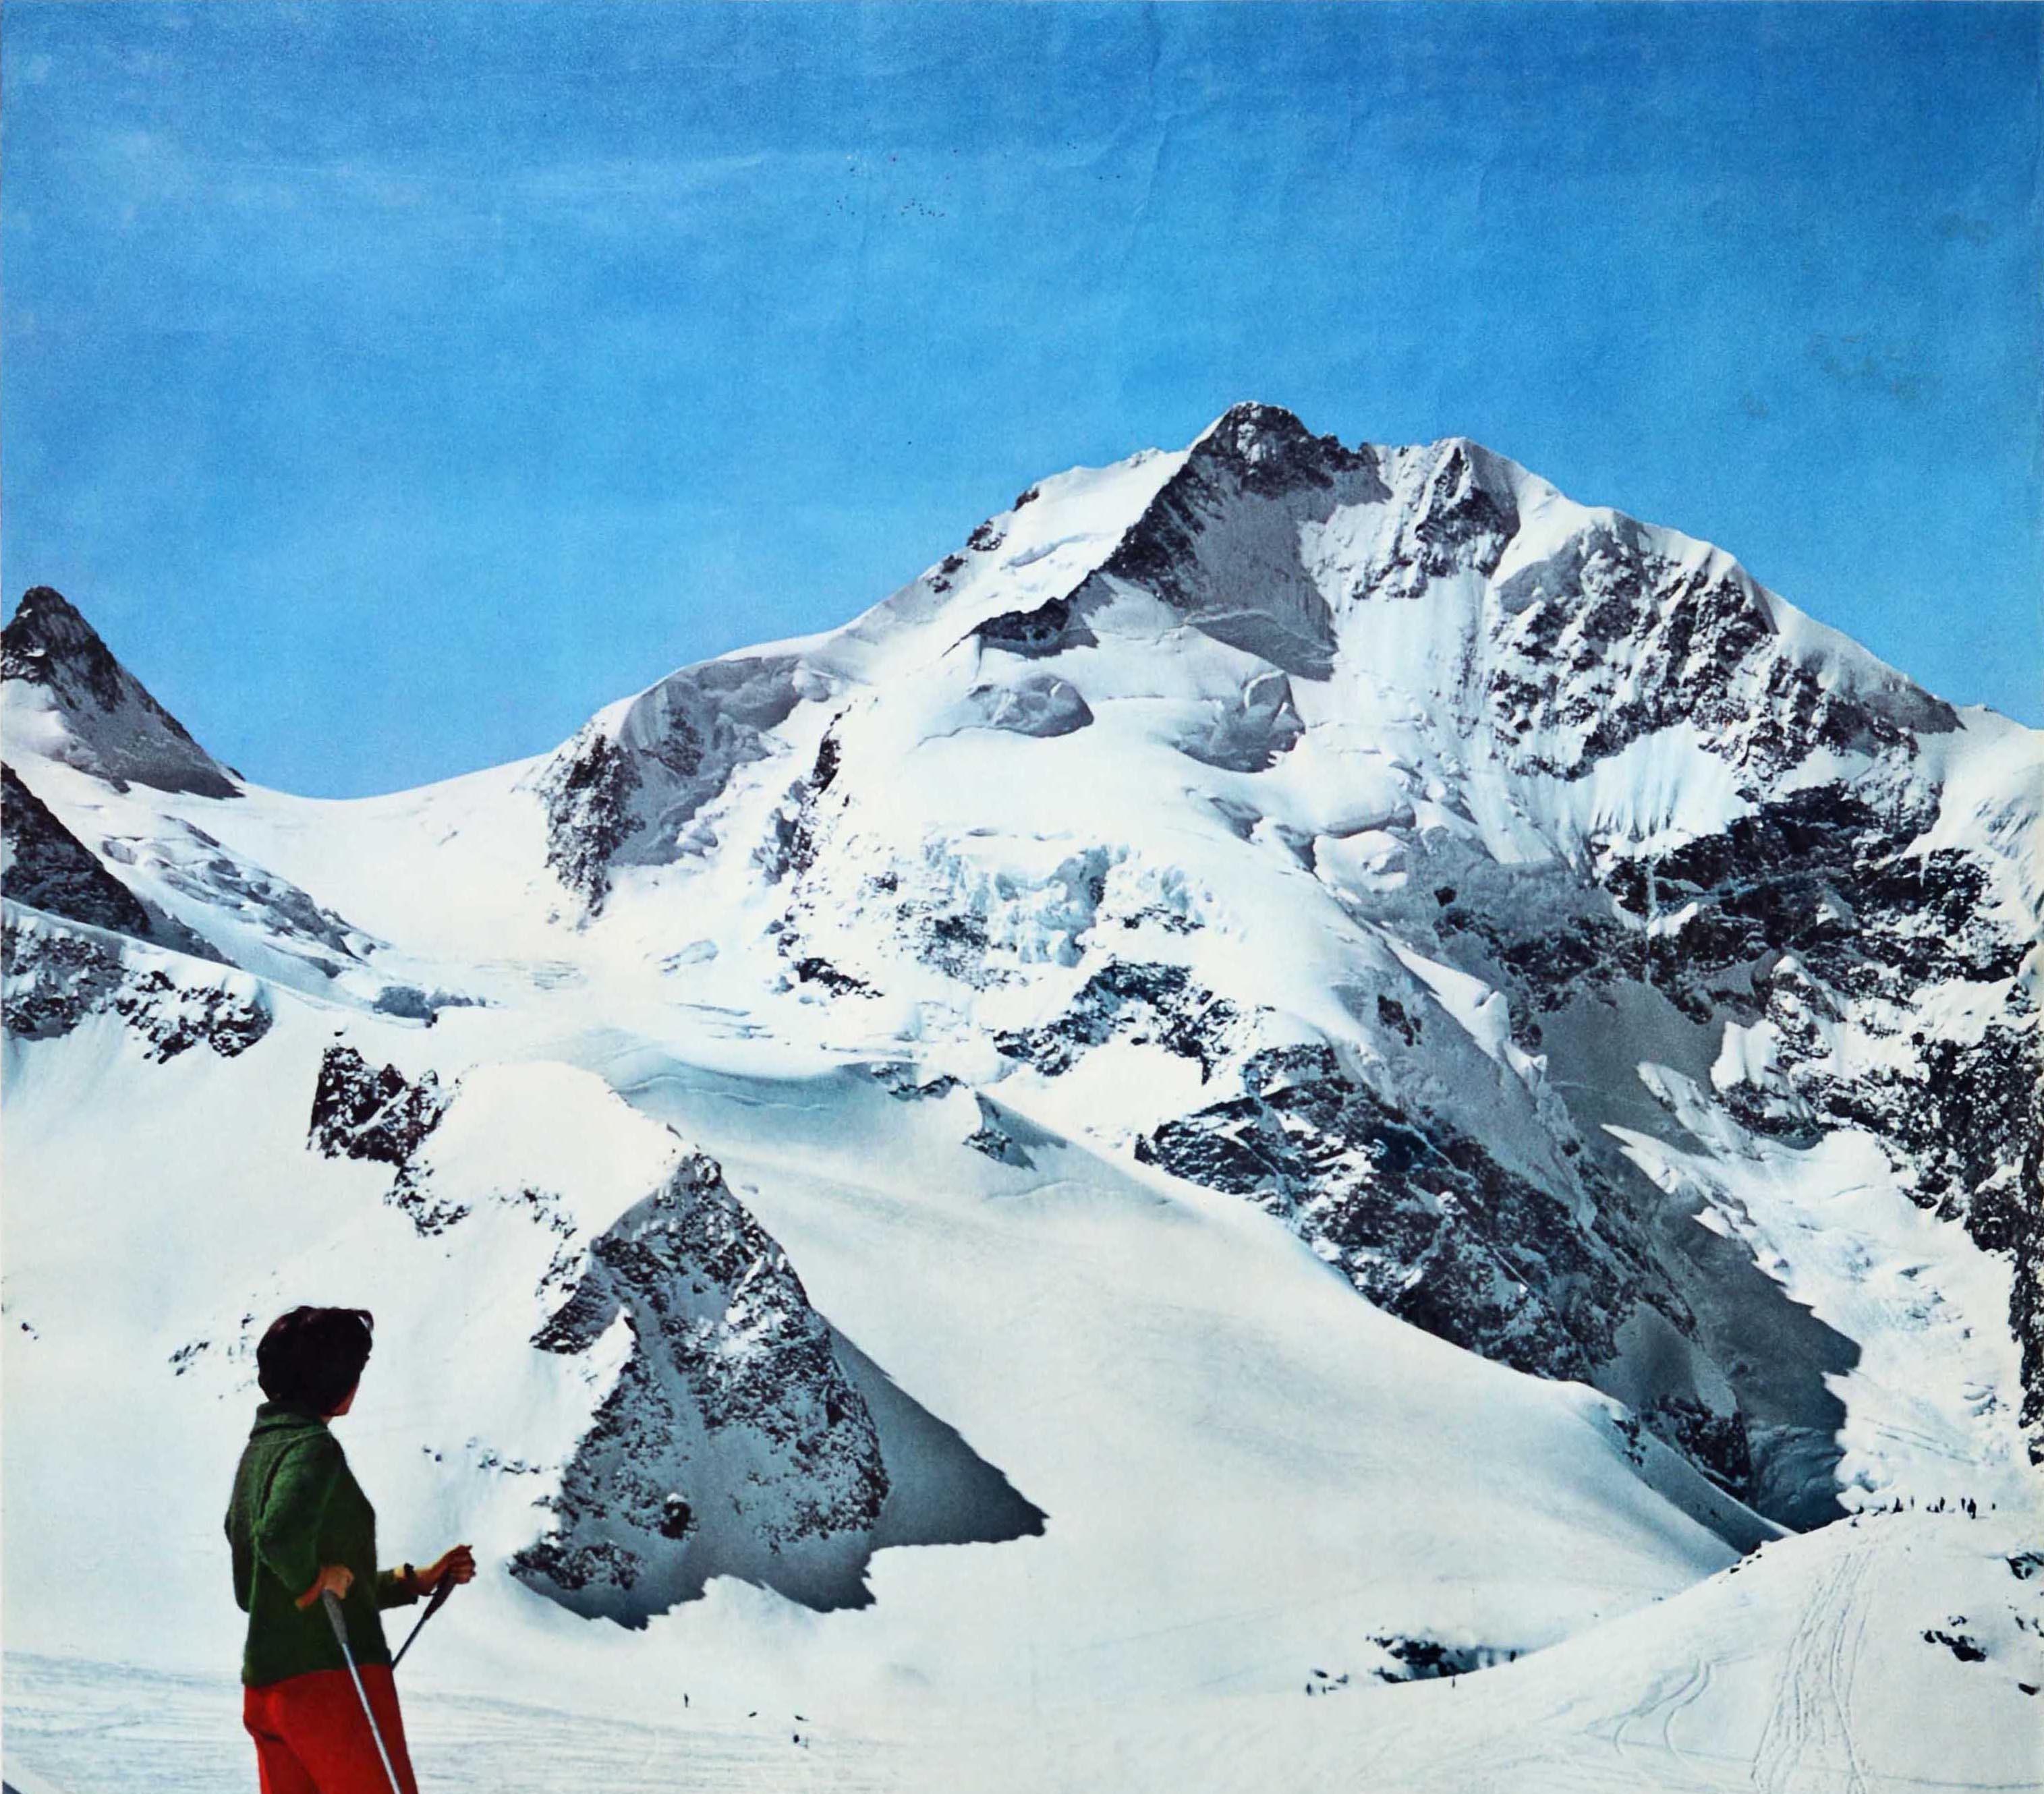 Original vintage winter sport ski poster for the popular Swiss resort of Pontresina featuring a photograph of a lady on skis standing on a mountain and admiring the beauty of the Engadin Alps with a ski lift and skiers on the piste below, the title